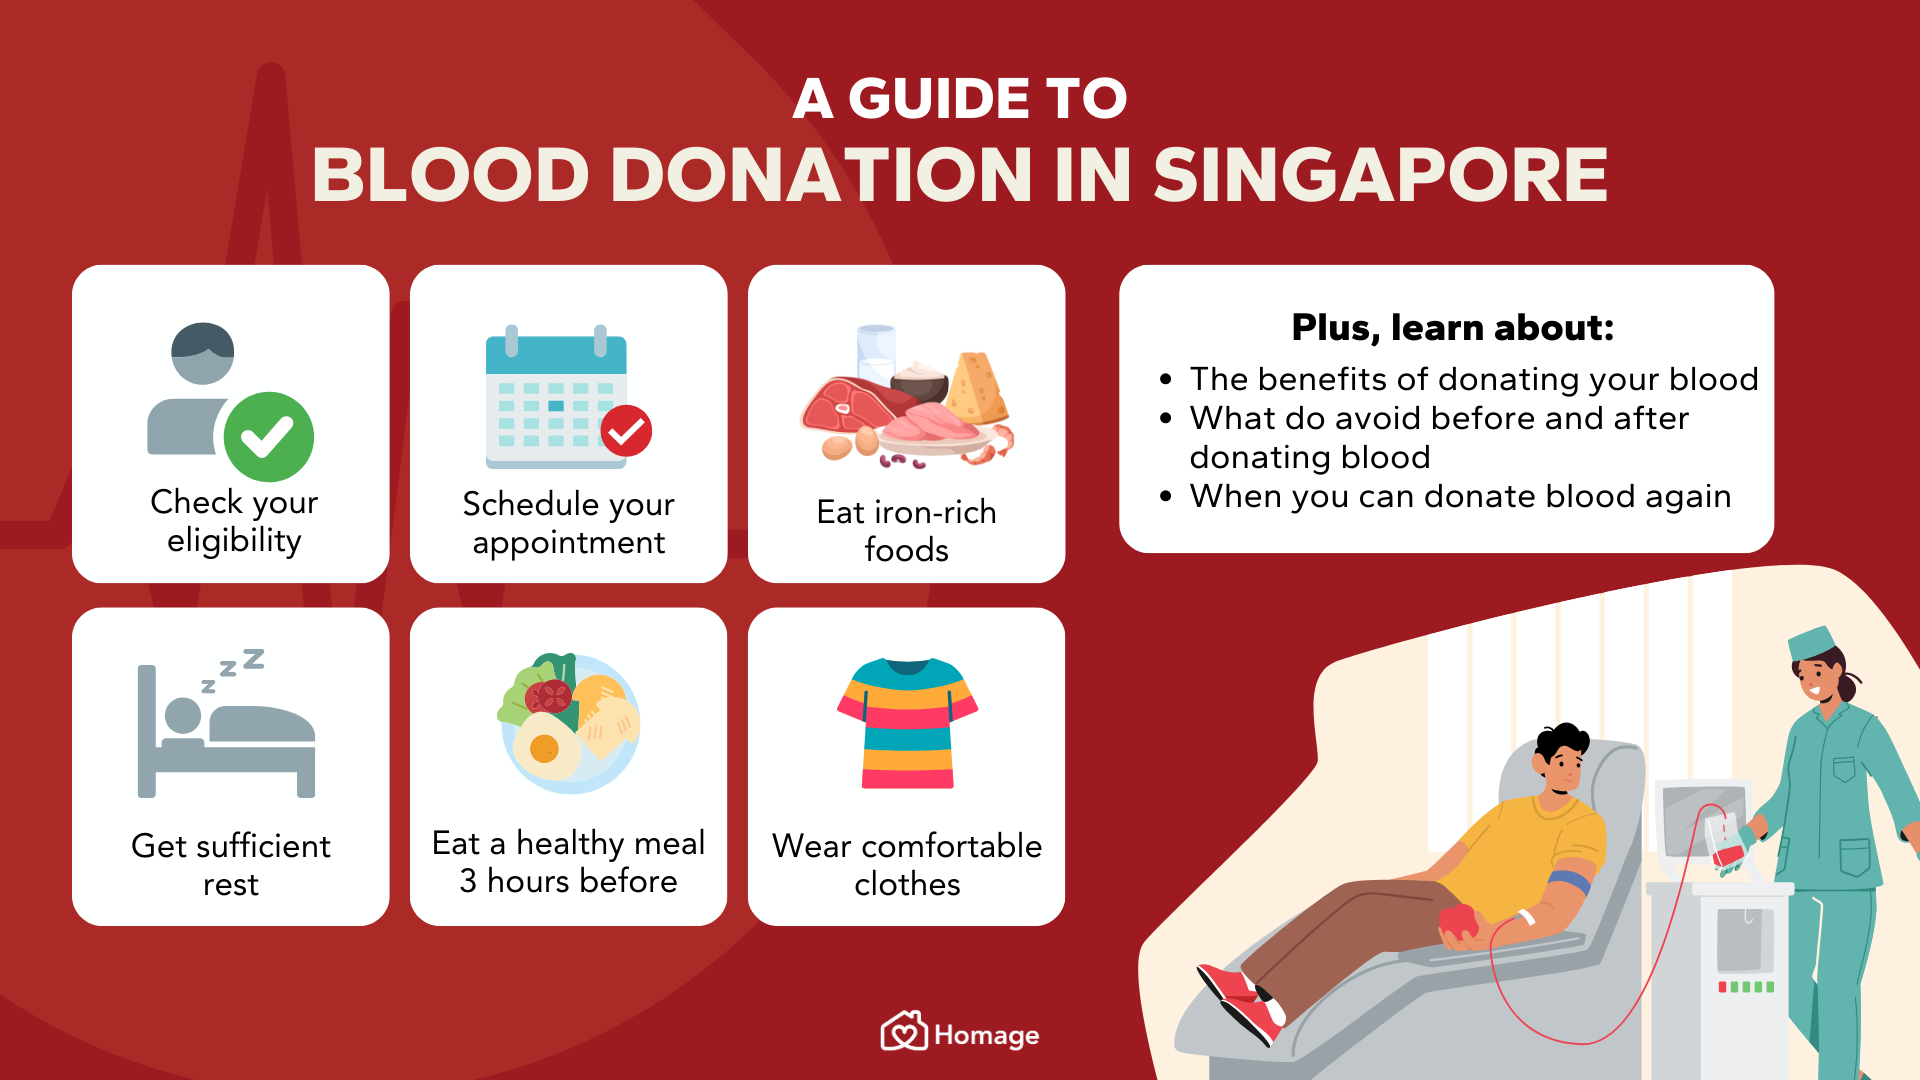 Infographic detailing the blood donation process in Singapore, as well as what to do and what to avoid.